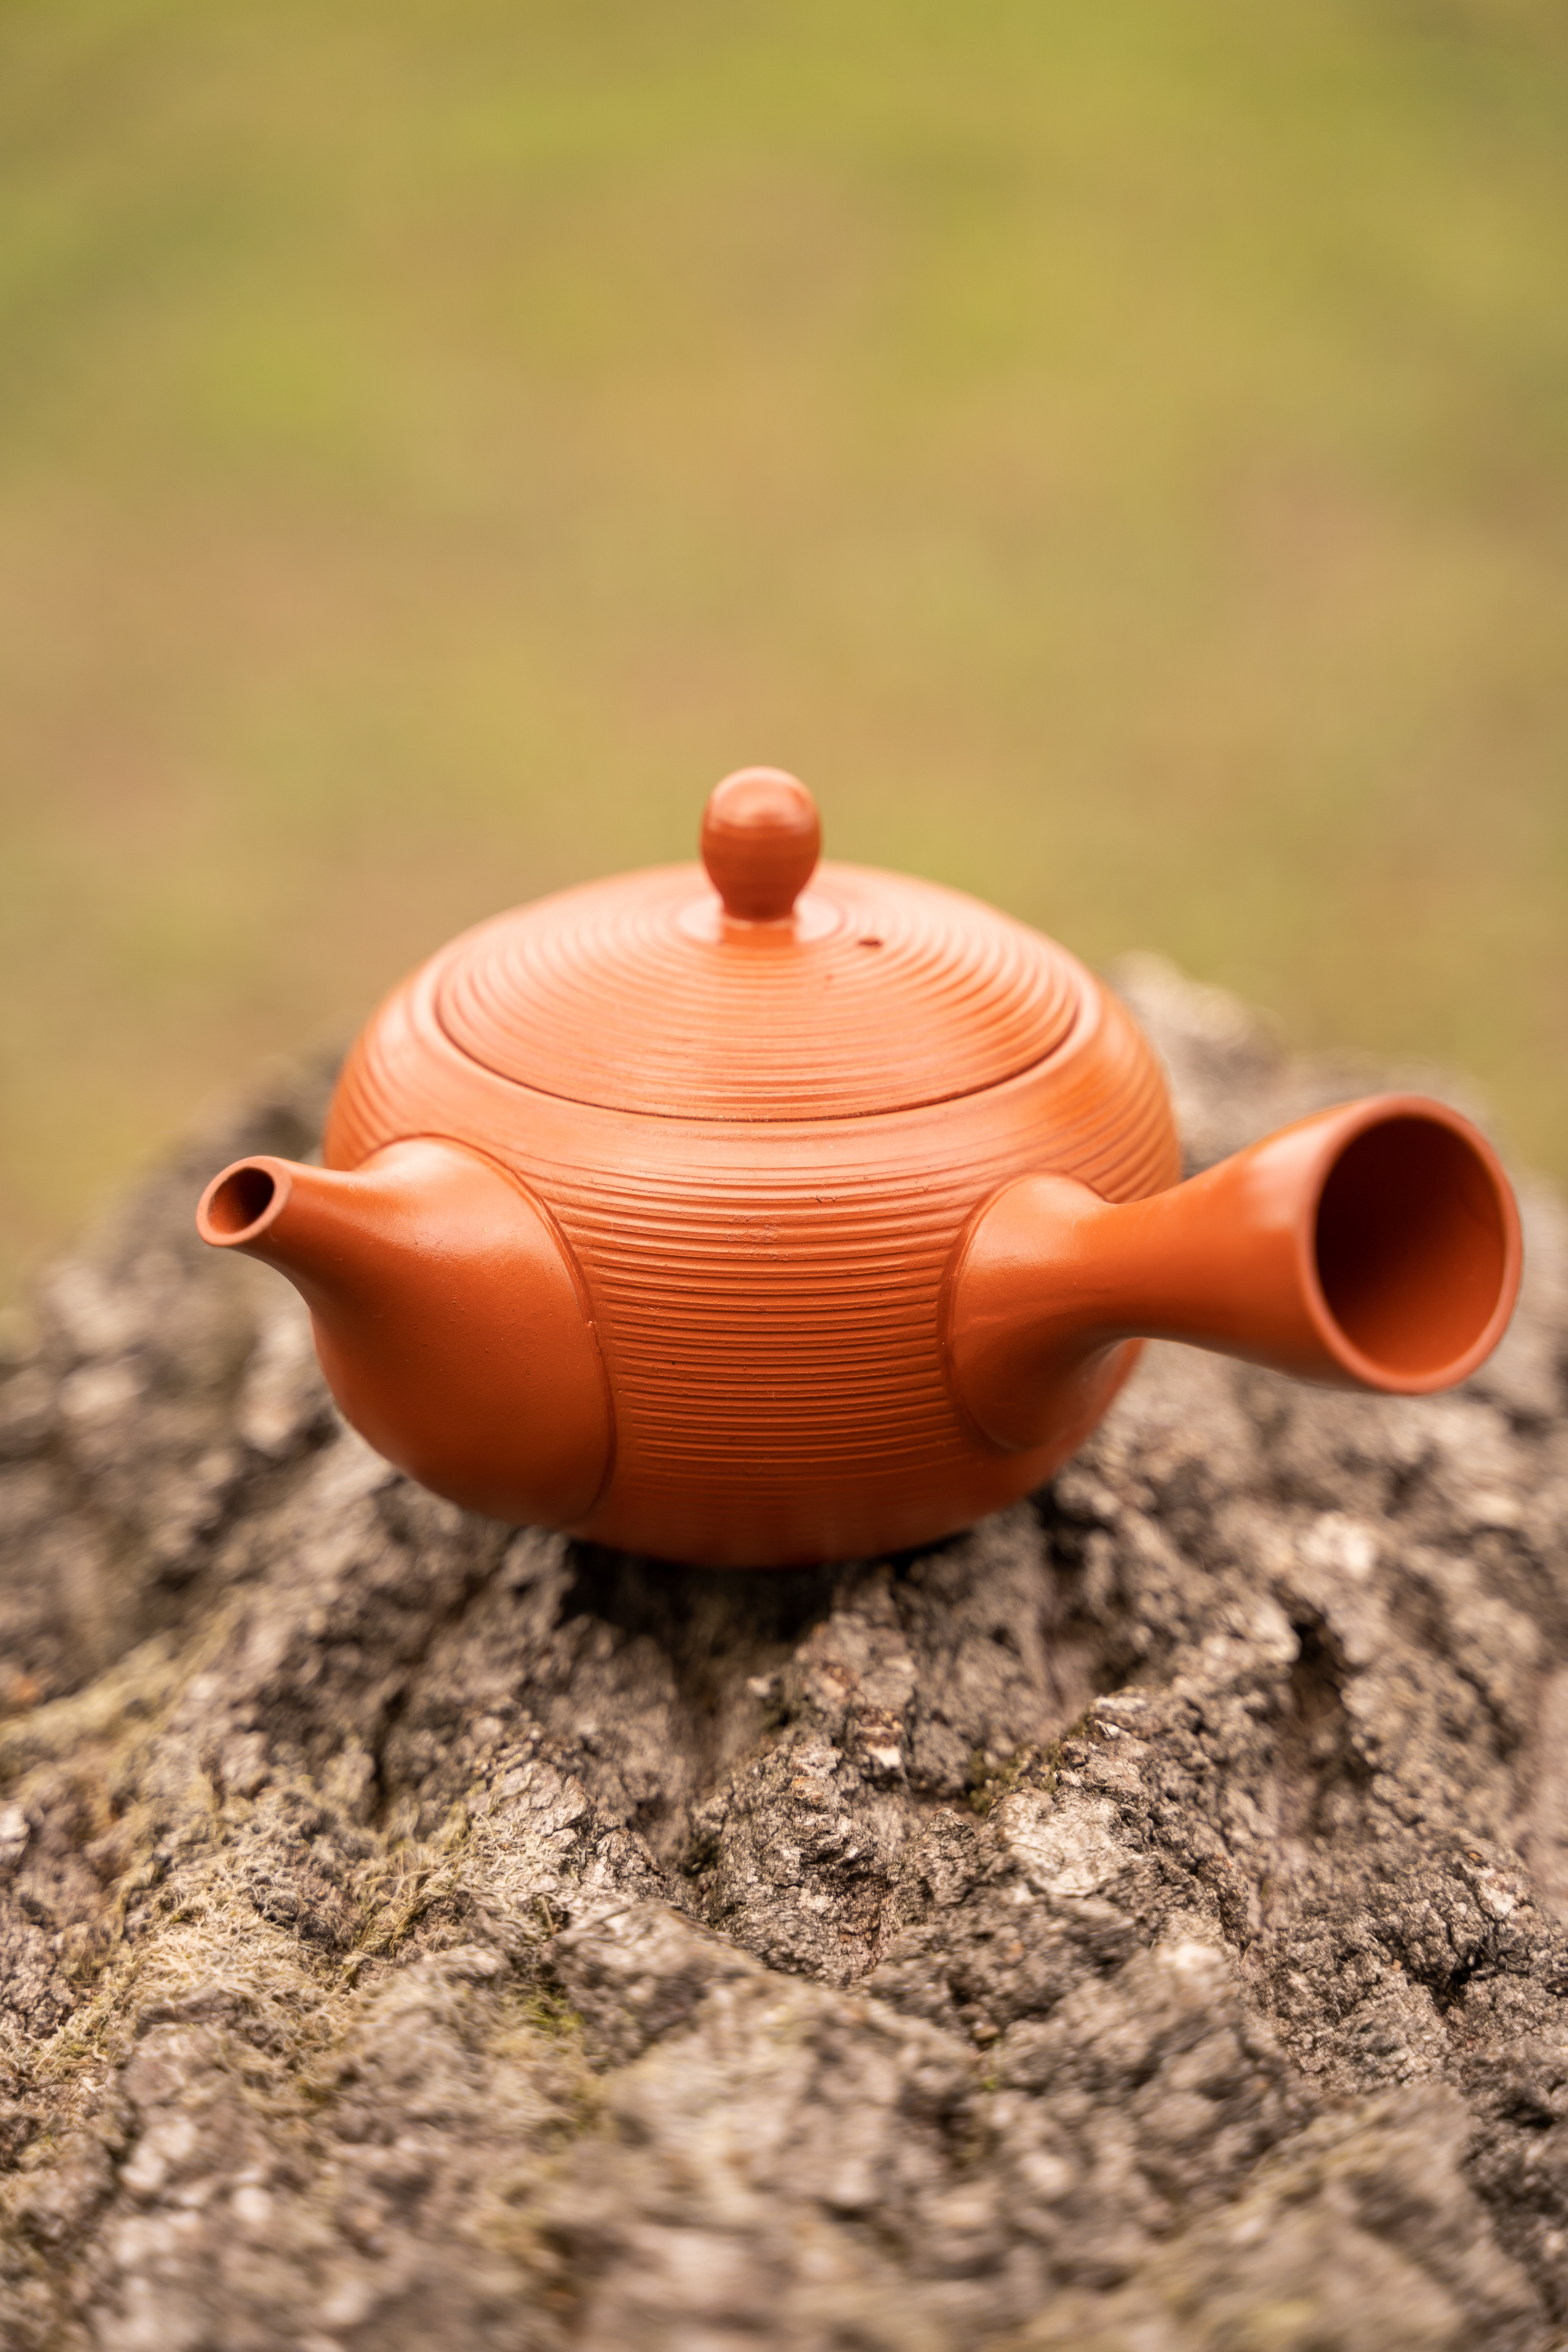 Kyusu-teapot, round, red with grooves, 350 ml